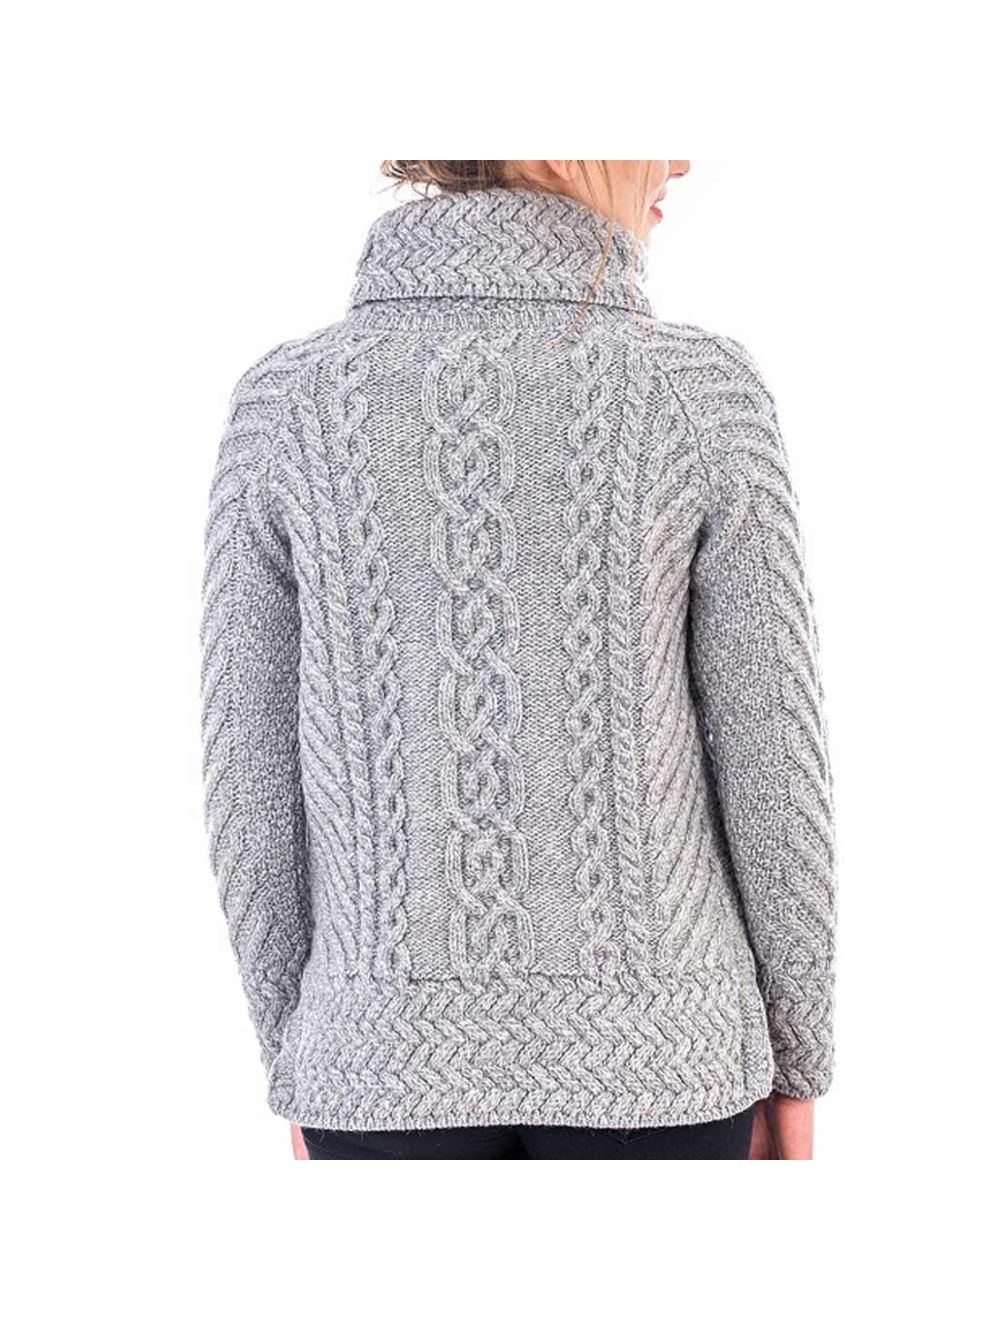 Cowl Neck Cable Knit Aran Sweater